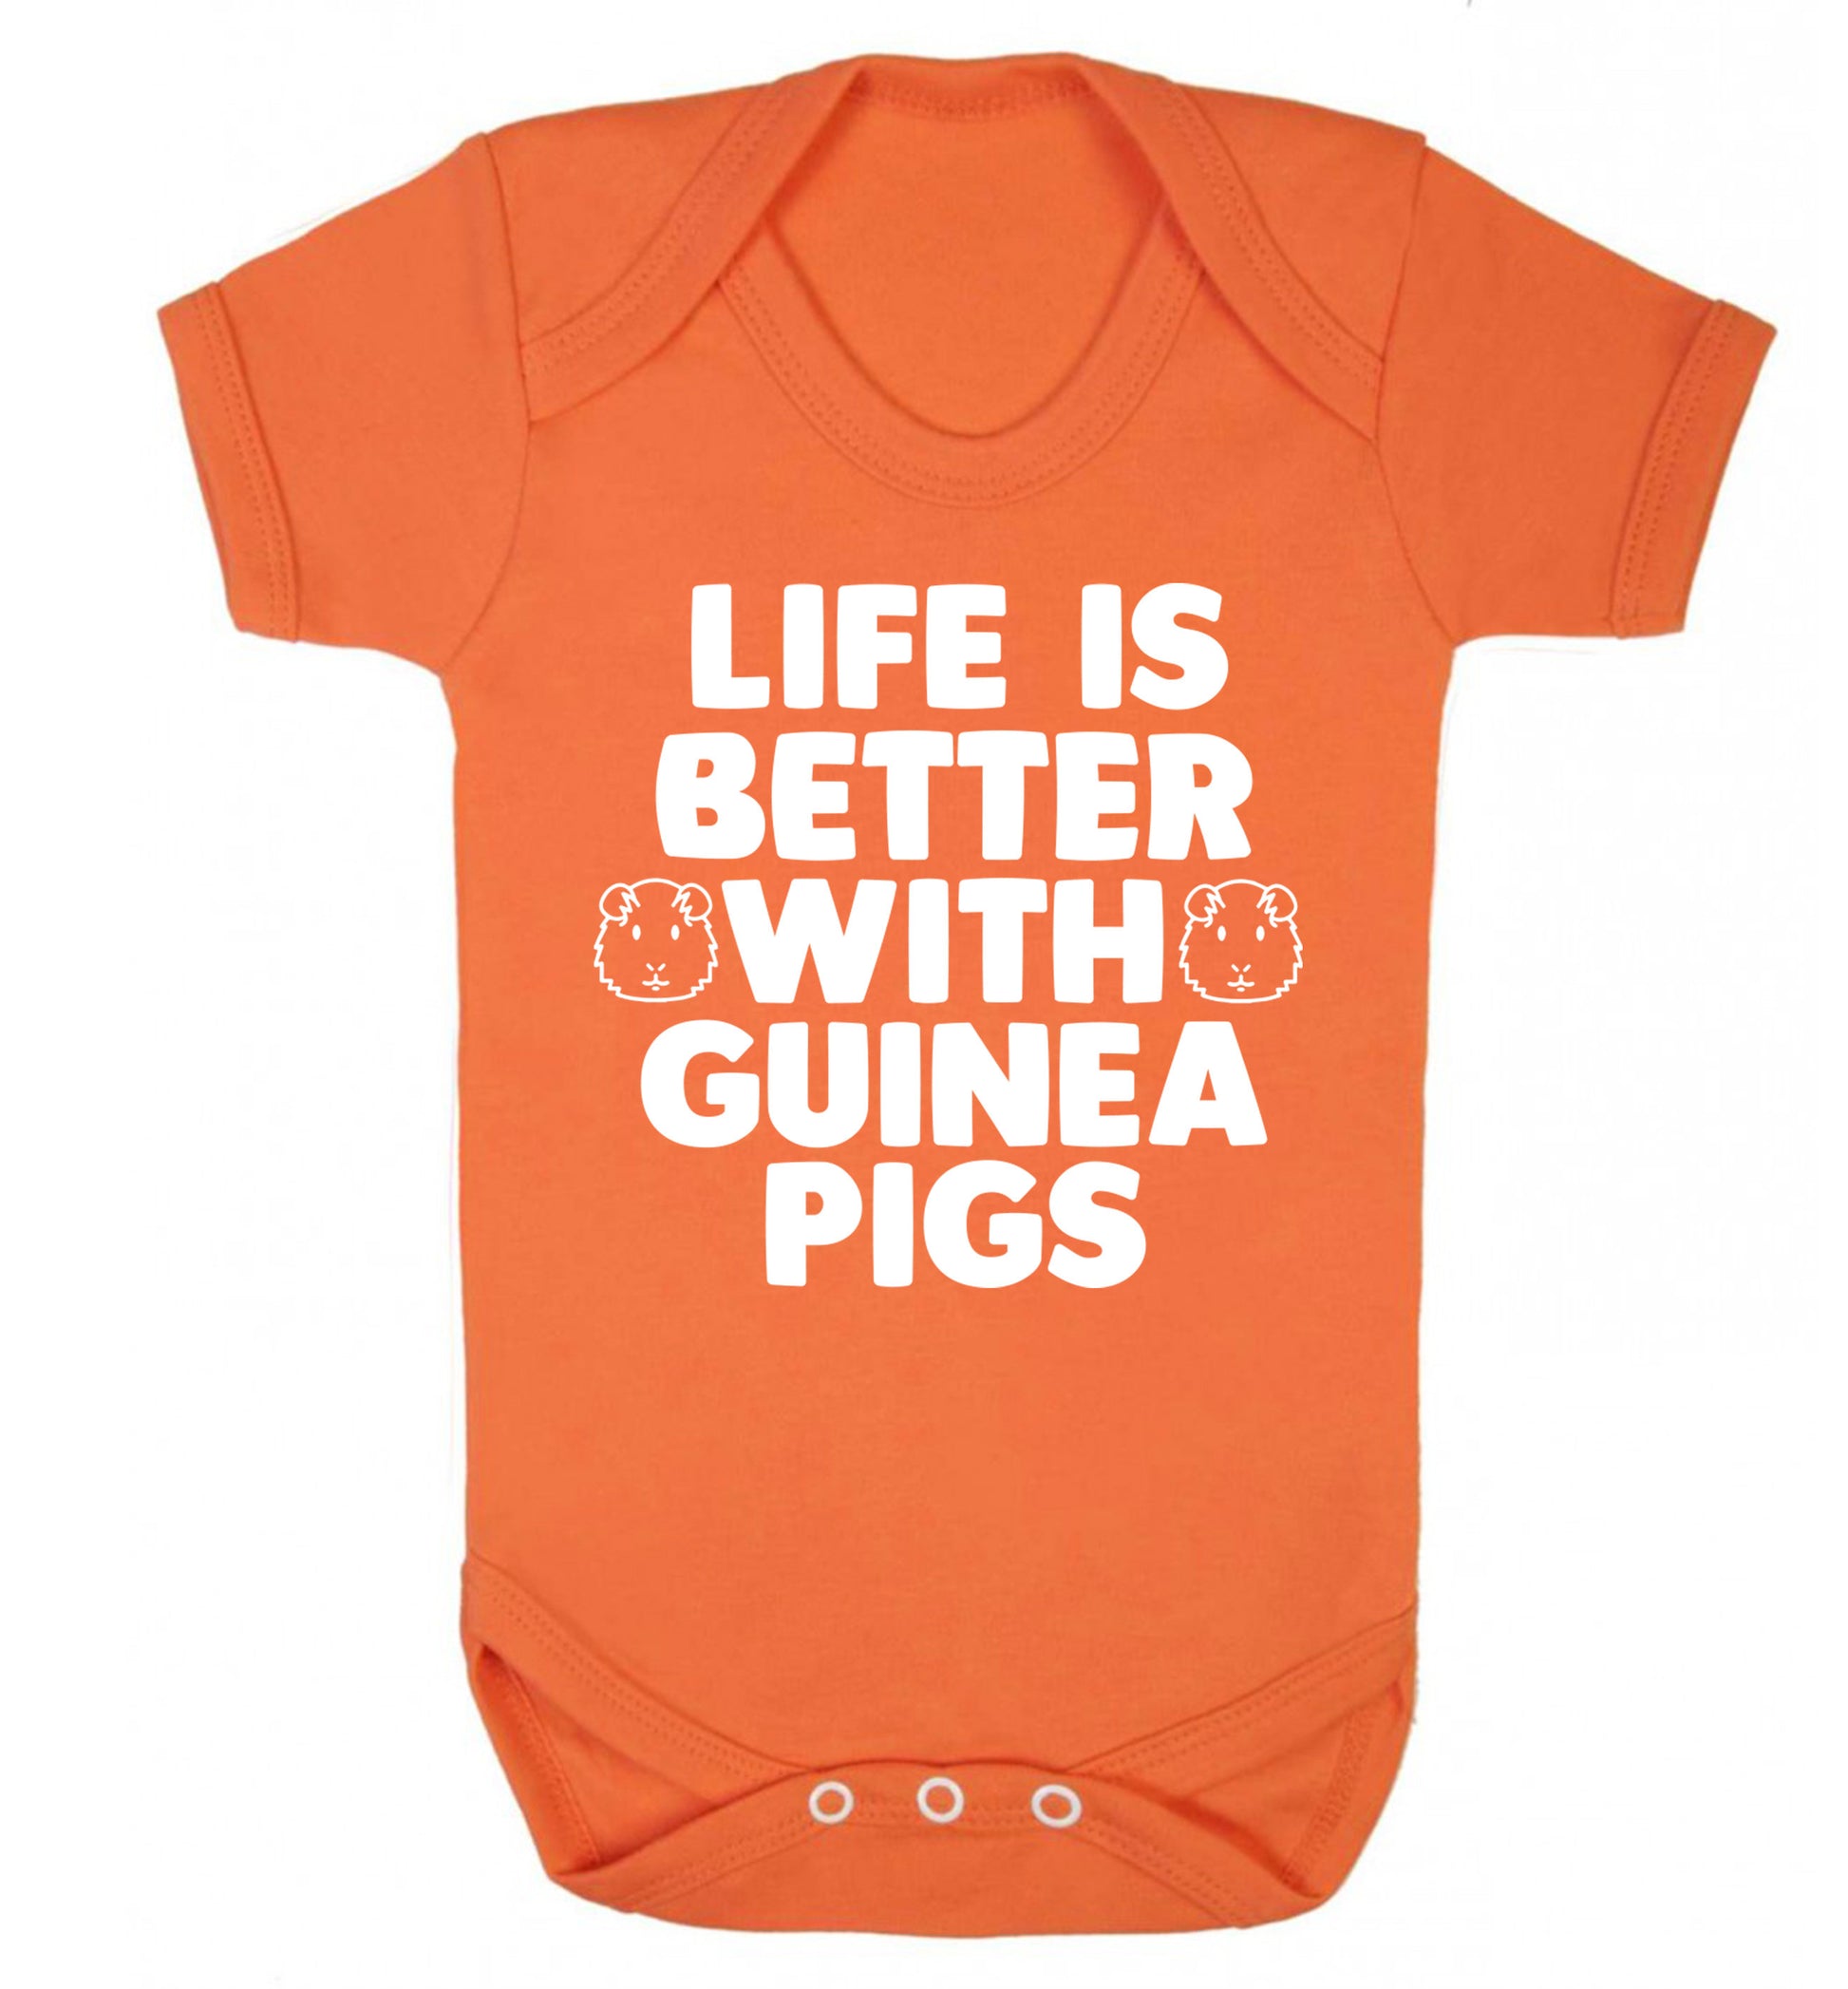 Life is better with guinea pigs Baby Vest orange 18-24 months